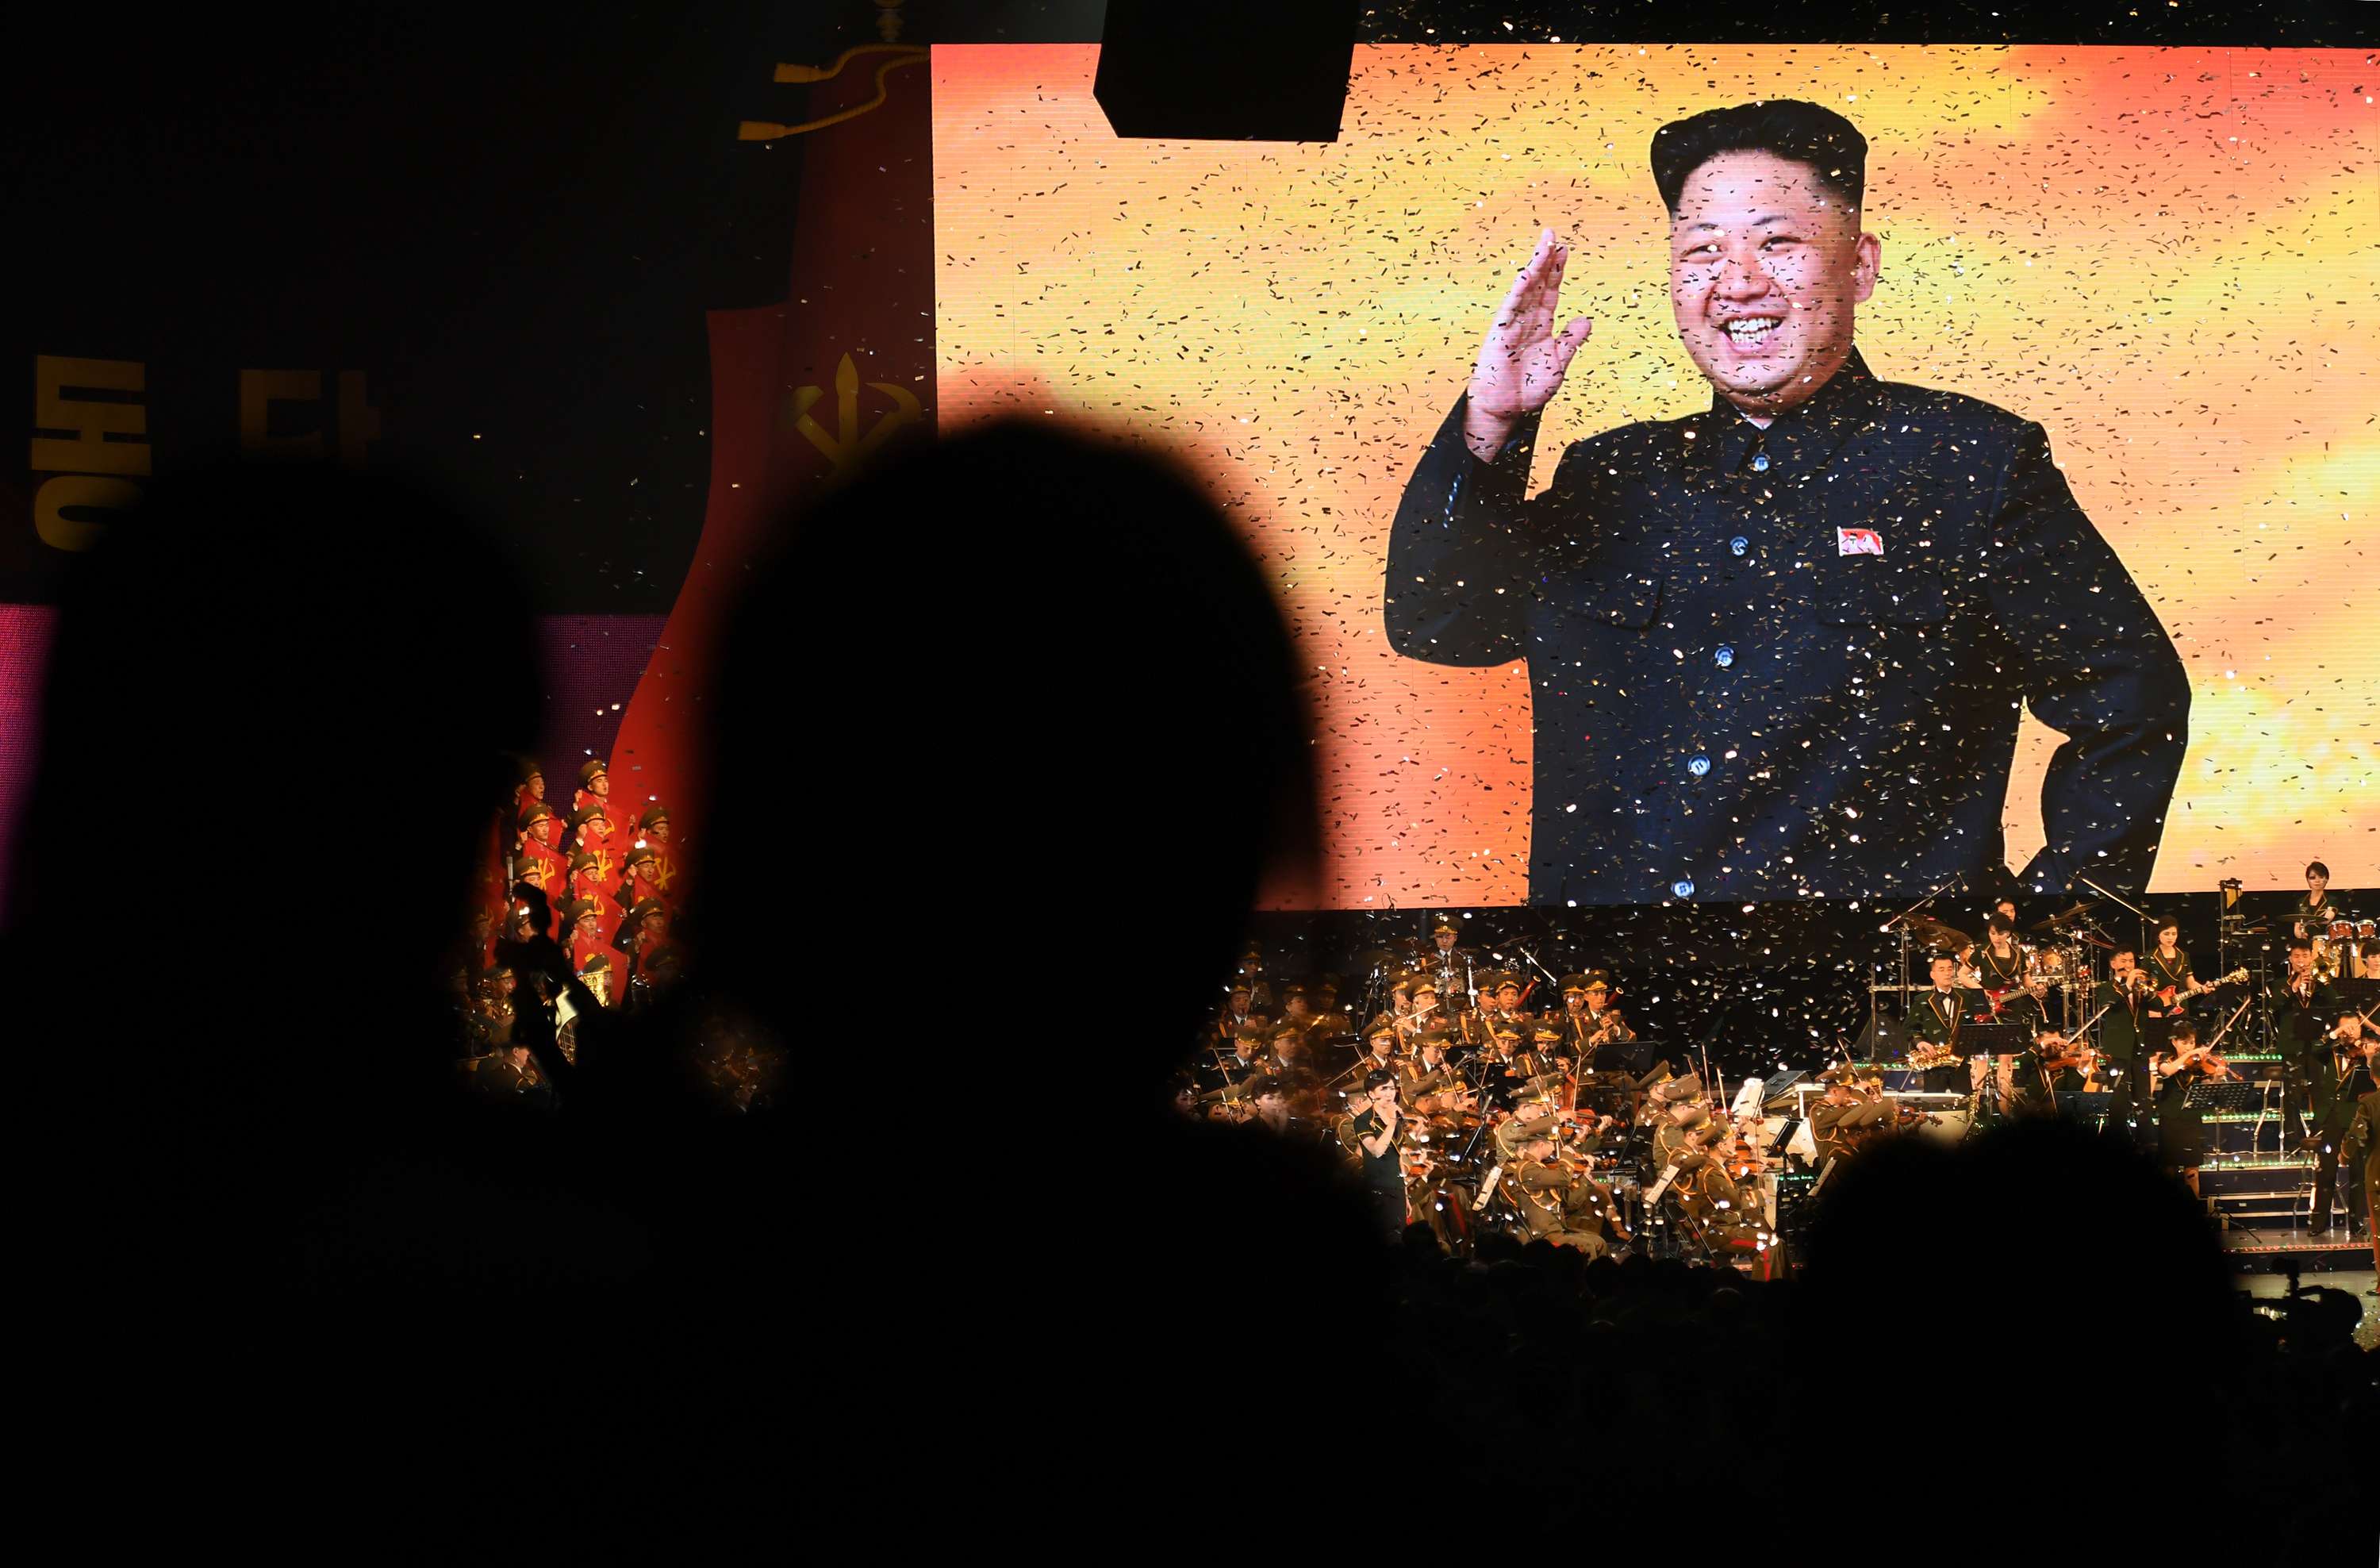 A giant image of Kim Jong-un and confetti appear at the end of a concert at Pyongyang Arena in the North Korean capital. Washington has not engaged the North Korean ruler since he took power in 2011. Even Beijing has had a testy relationship with him. Photo: Washington Post